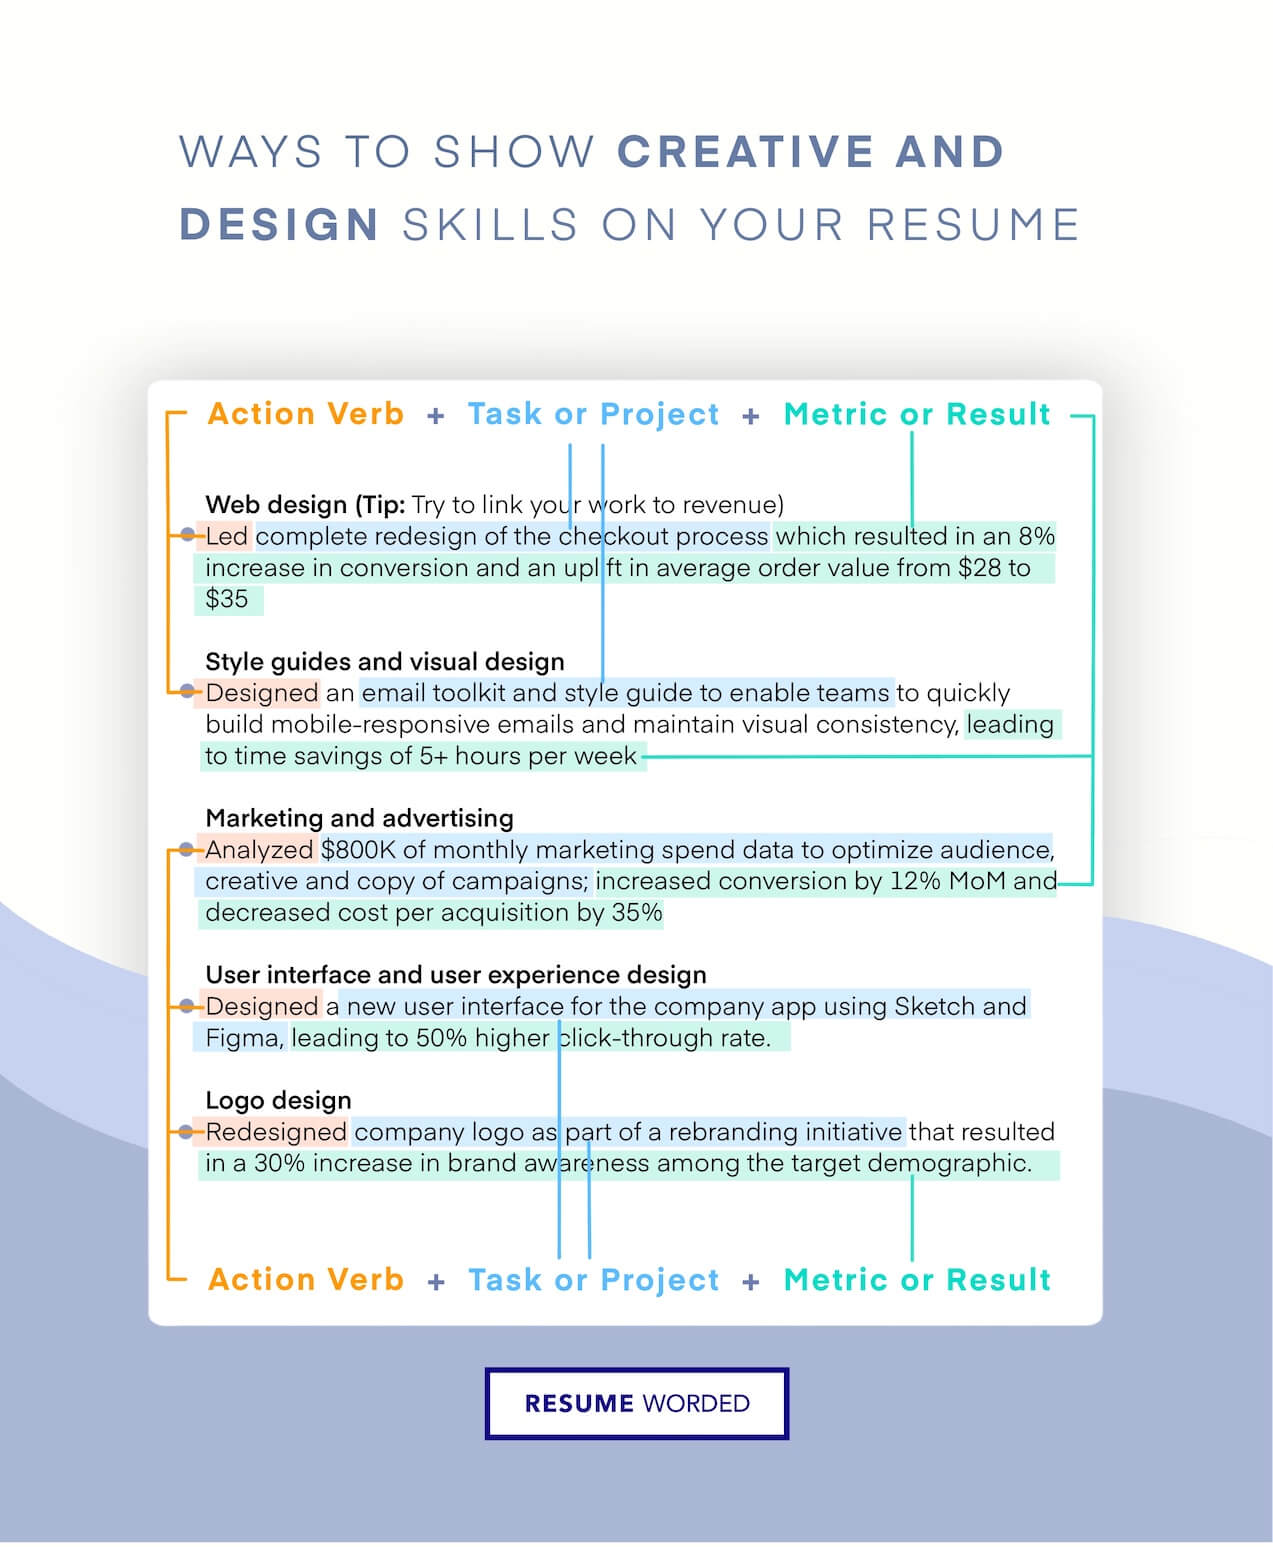 Demonstrate your ability to create new and successful designs - Fashion Design Director Resume